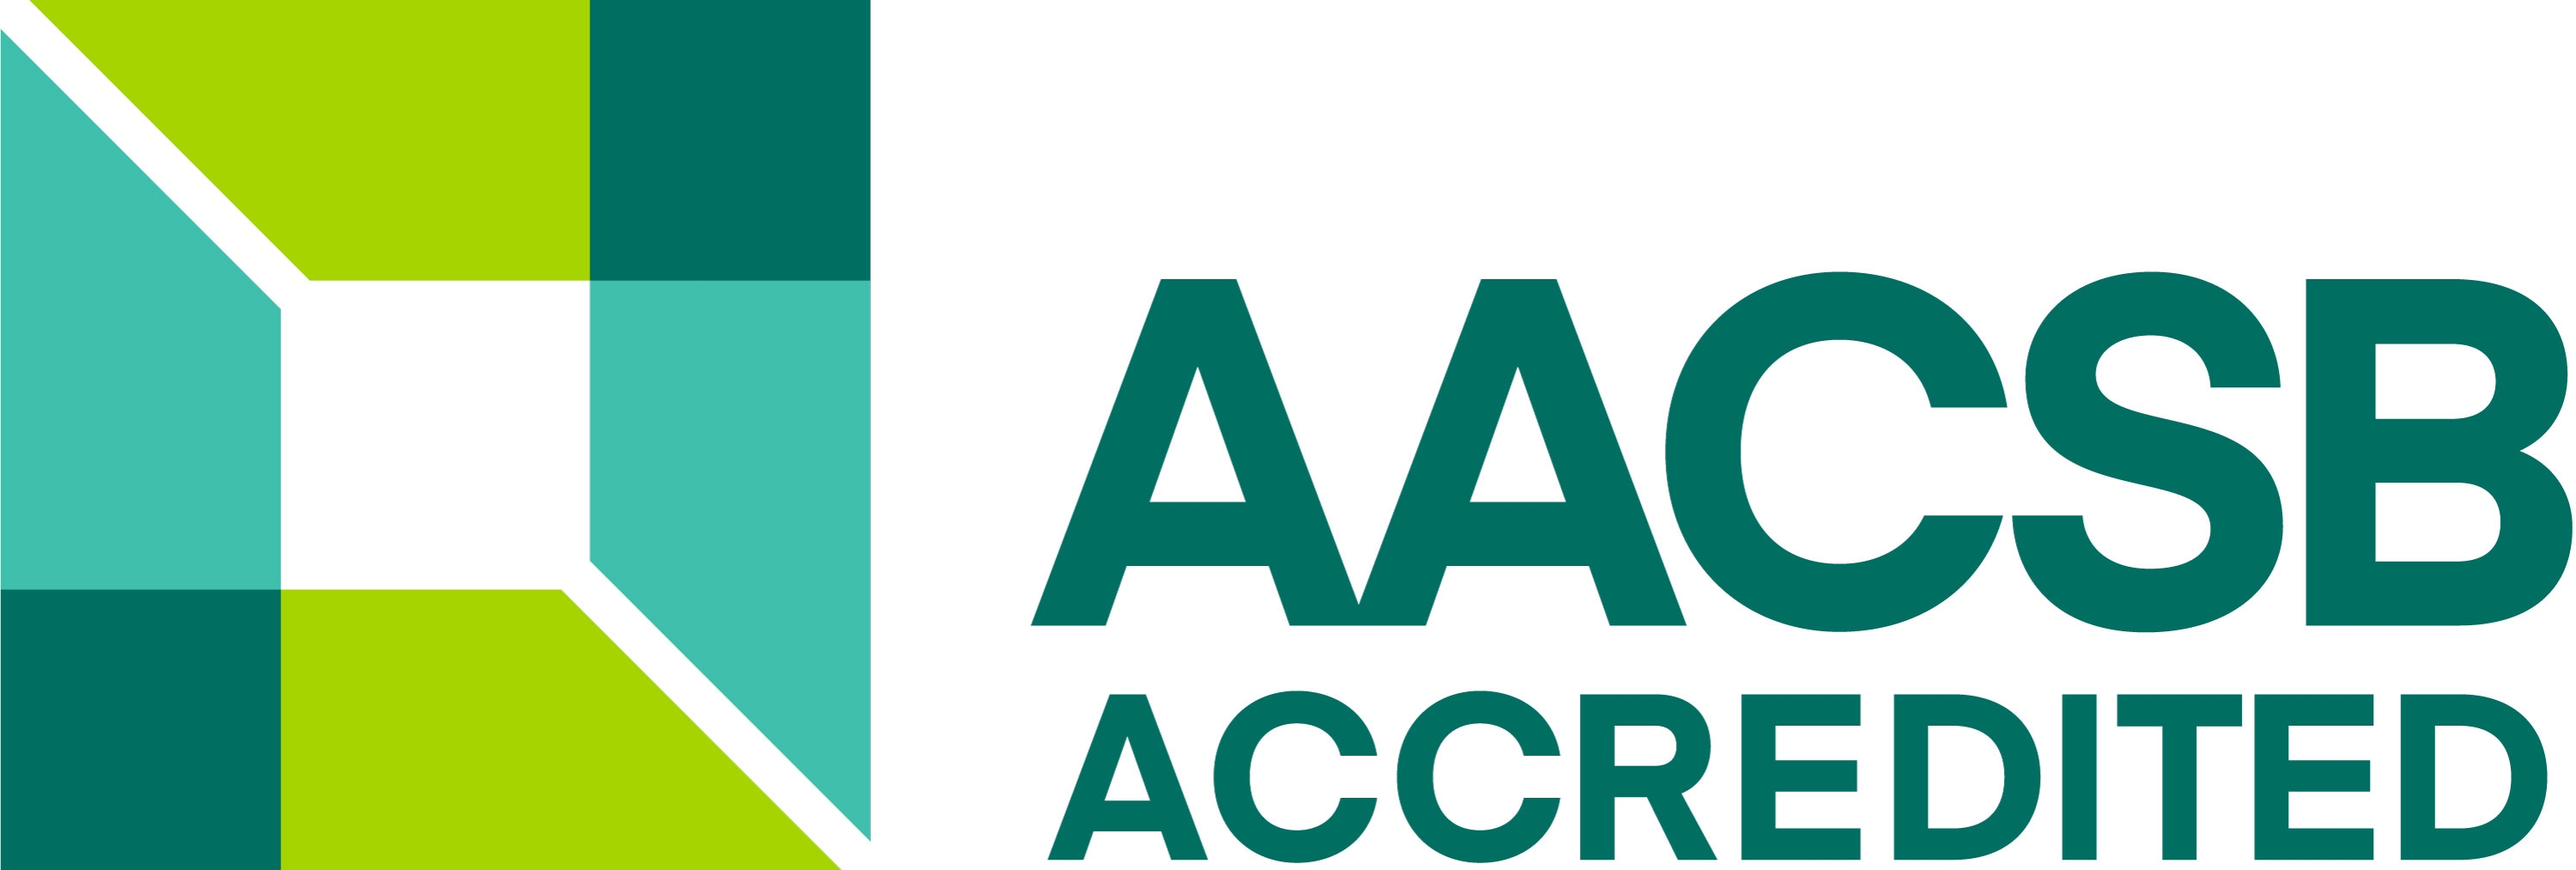 Seal of AACSB Accreditation